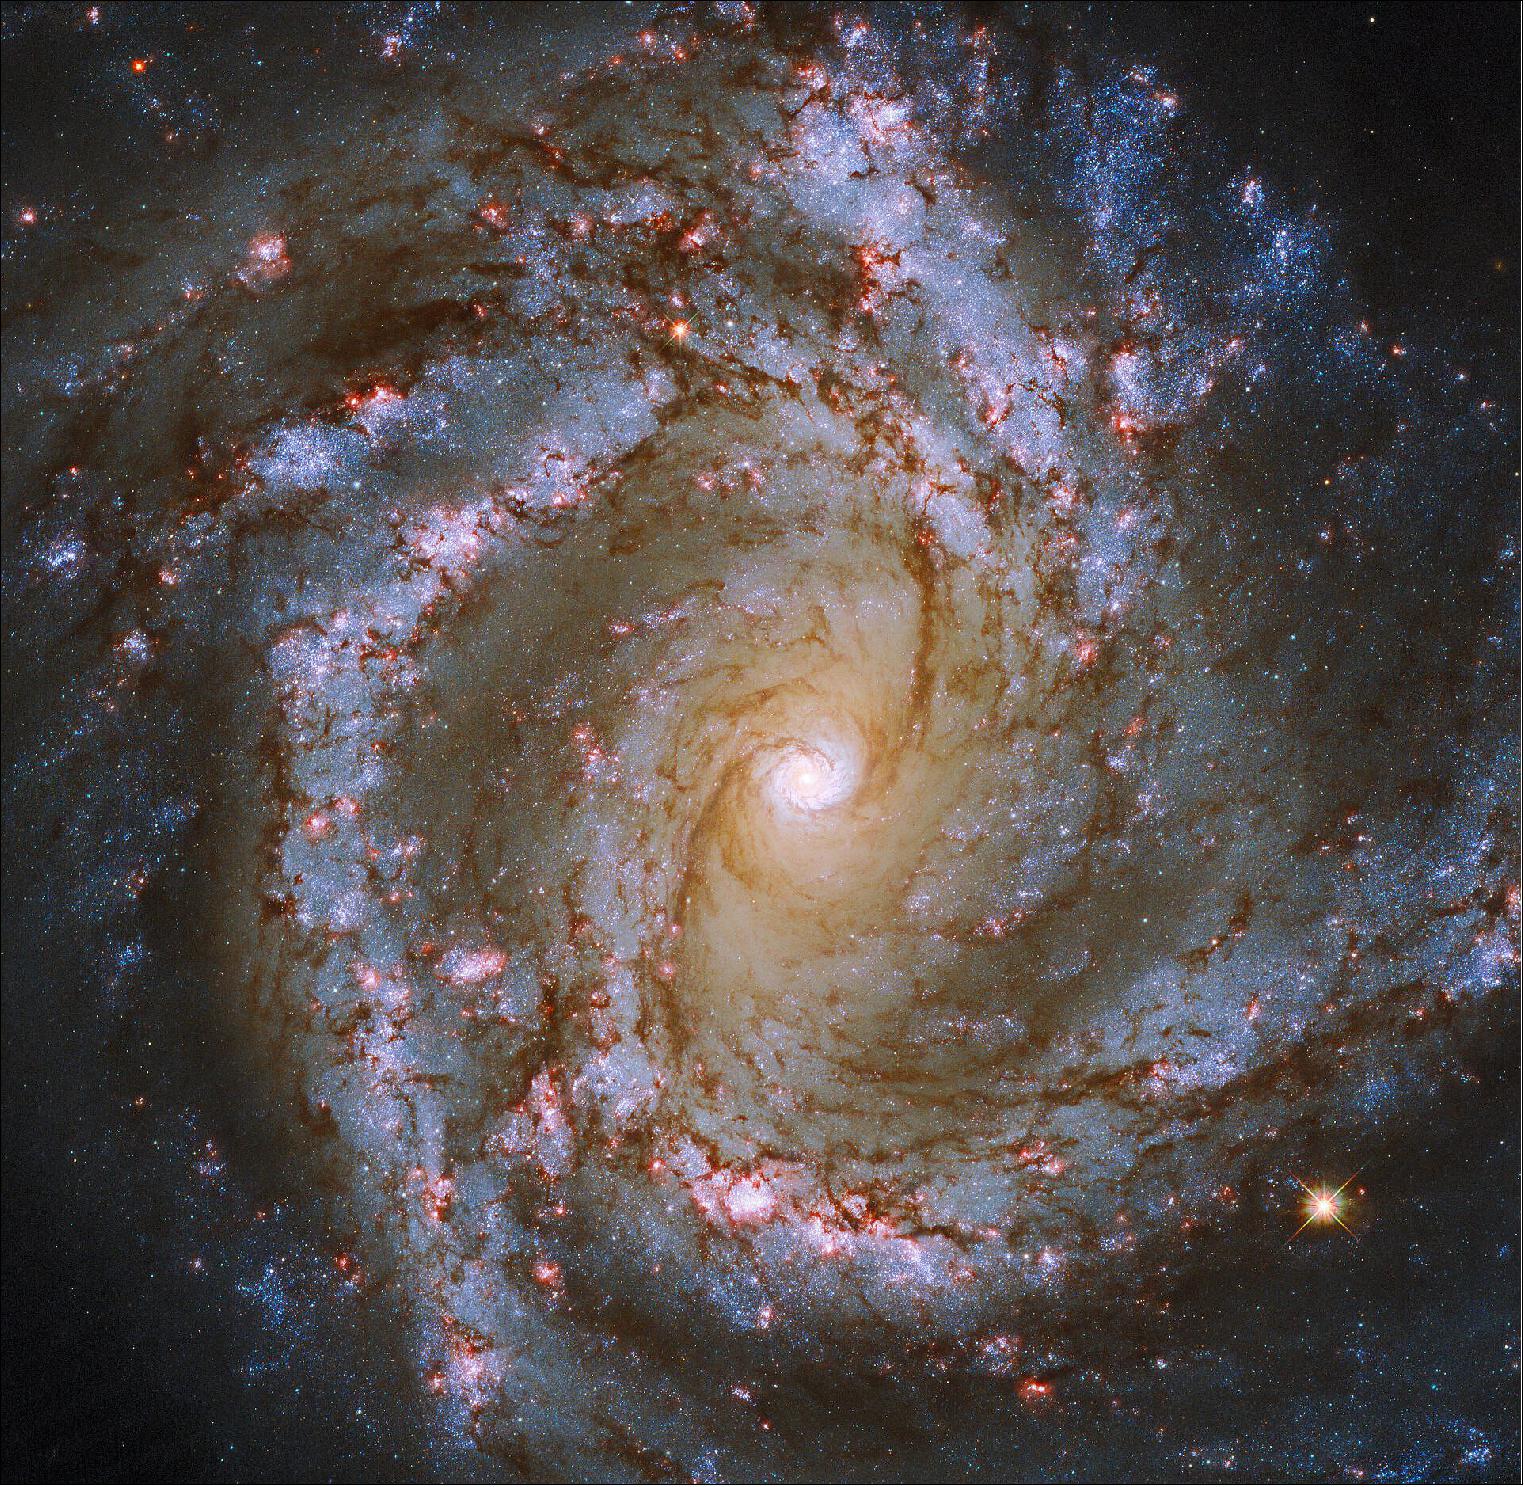 Figure 96: The luminous heart of the galaxy M61 dominates this image, framed by its winding spiral arms threaded with dark tendrils of dust. As well as the usual bright bands of stars, the spiral arms of M61 are studded with ruby-red patches of light. Tell-tale signs of recent star formation, these glowing regions lead to M61’s classification as a starburst galaxy (image credit: ESA/Hubble & NASA, ESO, J. Lee and the PHANGS-HST Team; CC BY 4.0)